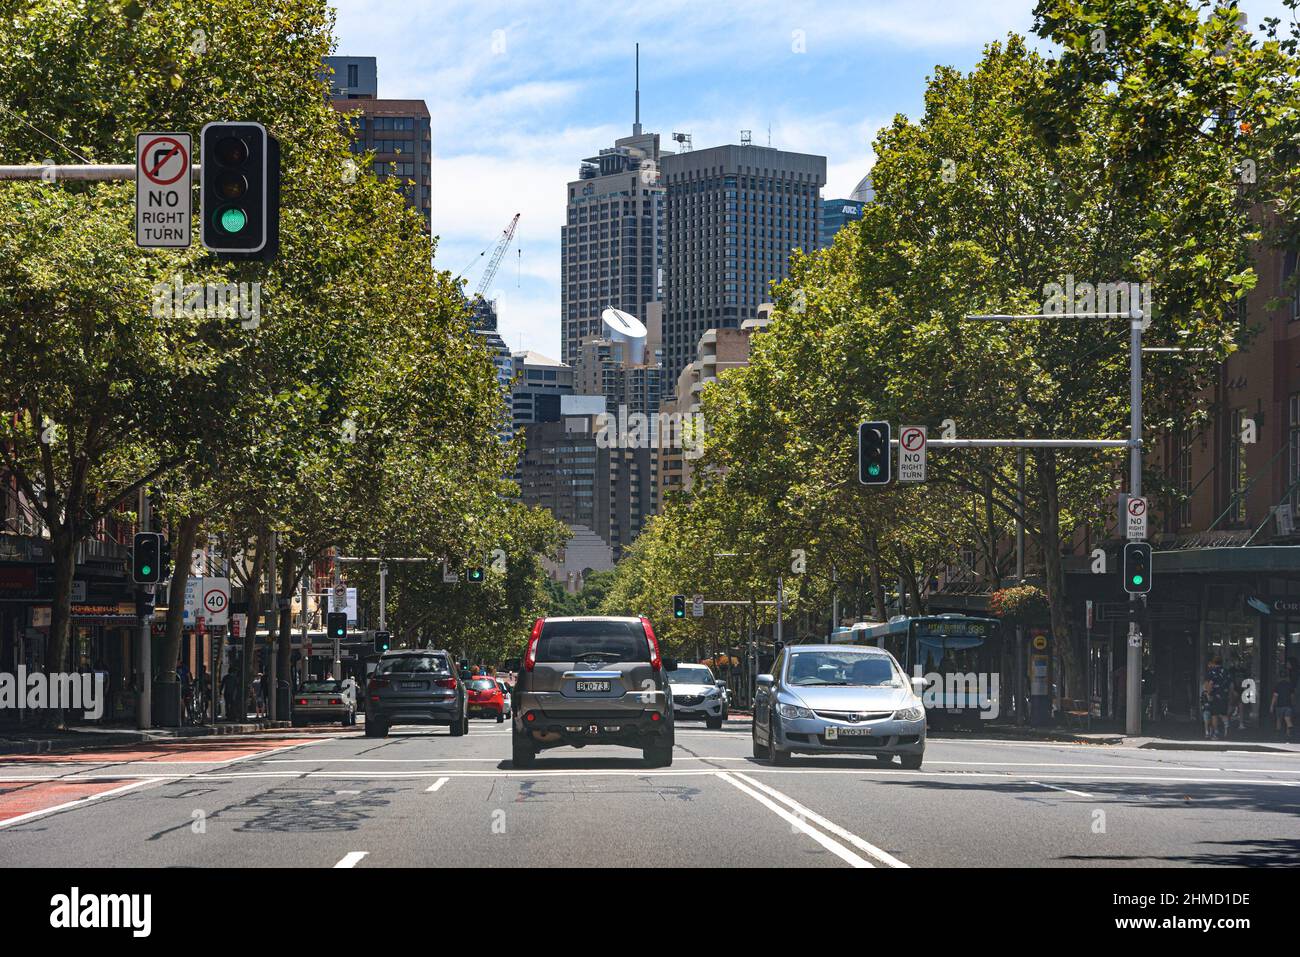 Looking northwest on Oxford Street in Sydney with cars on the road Stock Photo